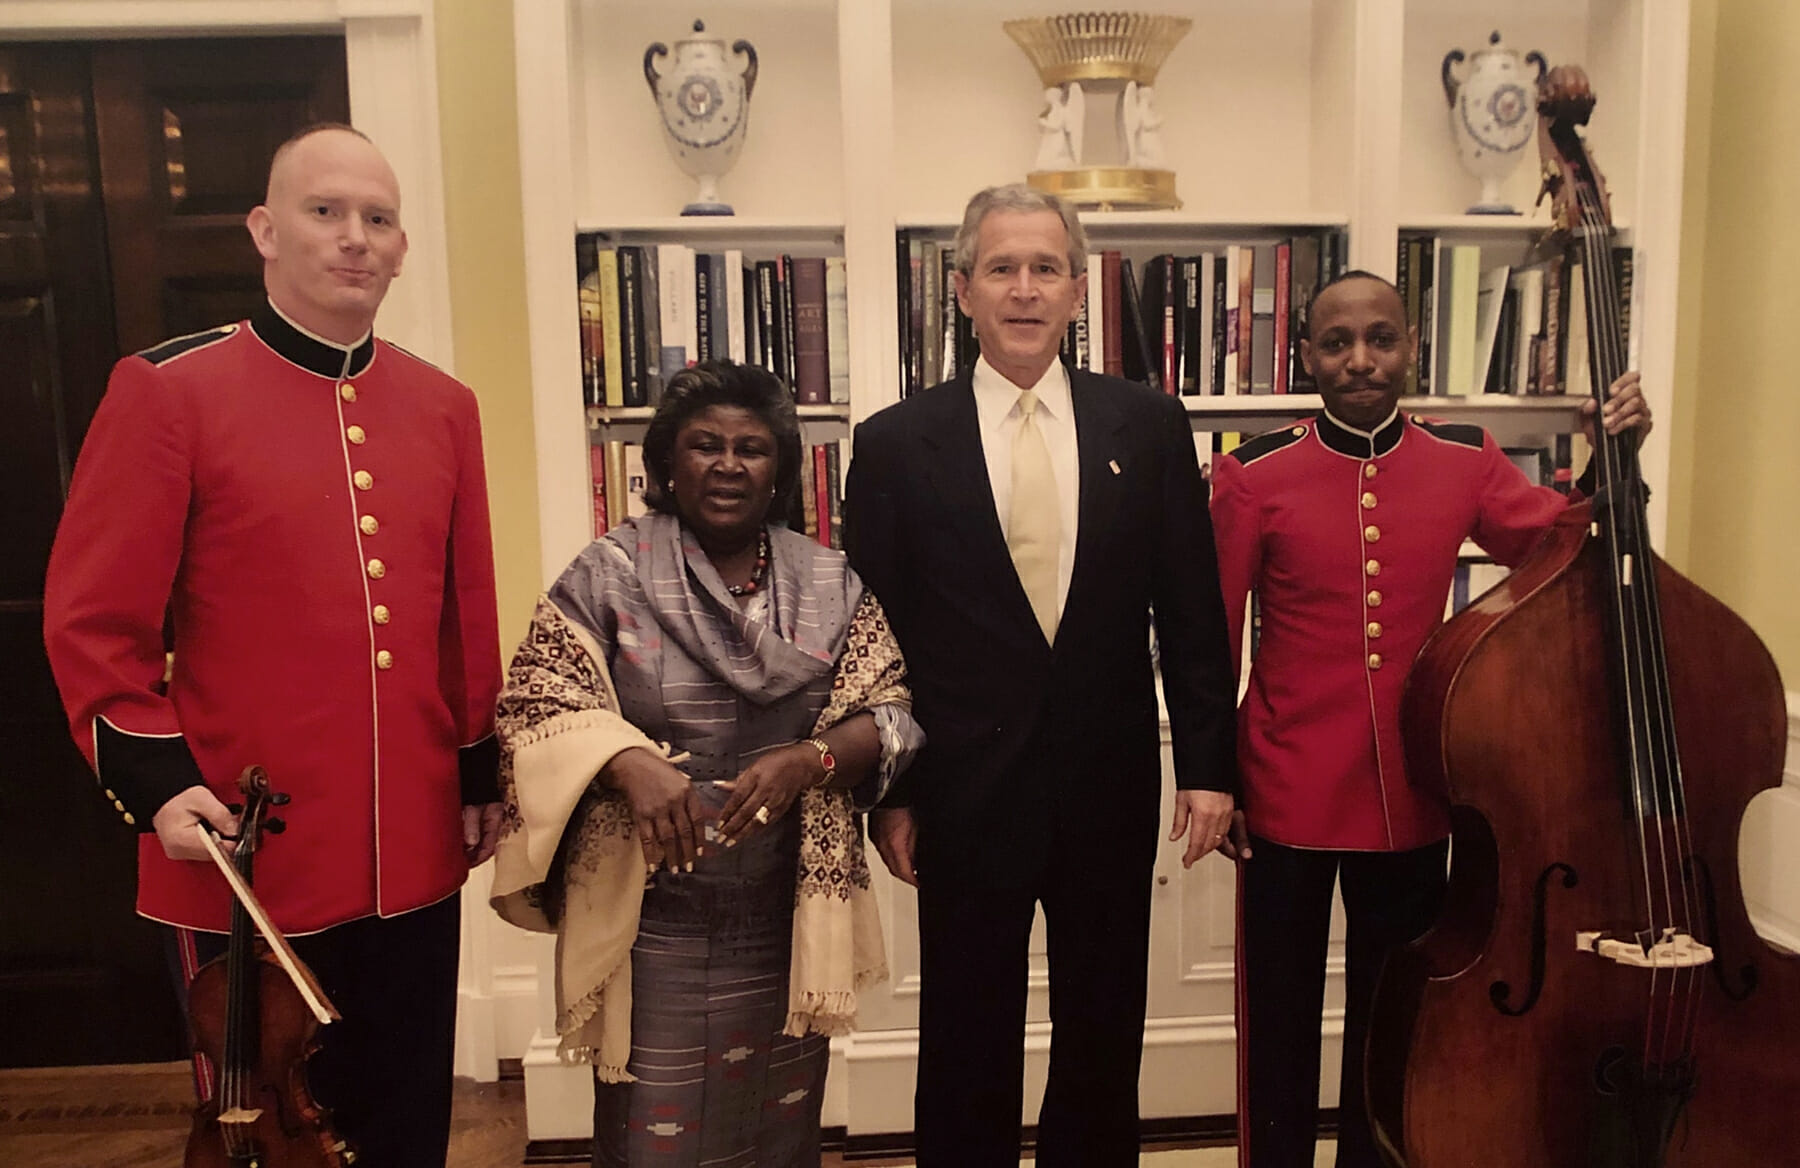 Peter Wilson, Theresa Kufuor (first lady of Ghana), President George W. Bush and Aaron Clay